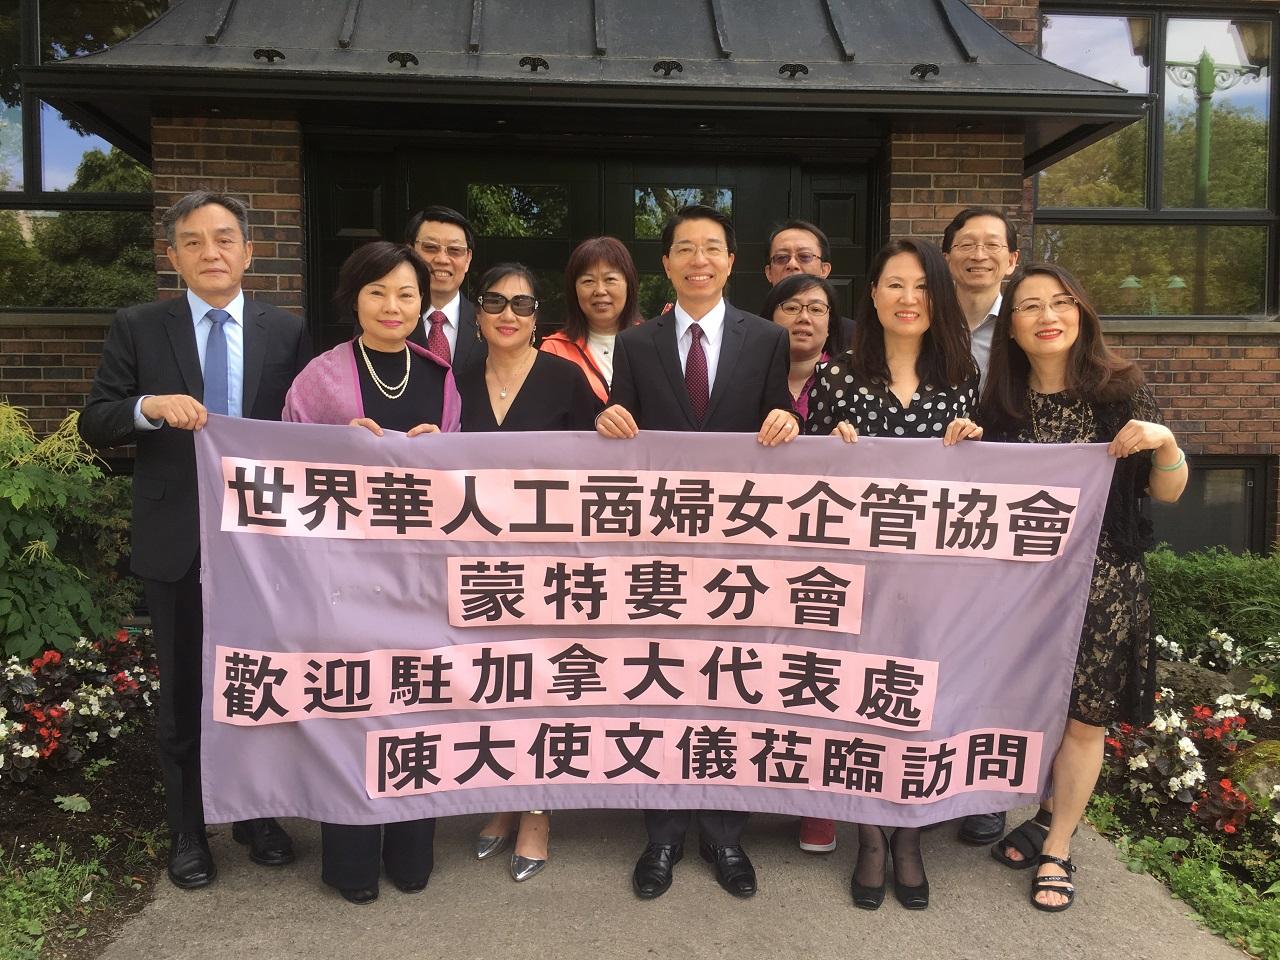 Representative Winston Wen-yi Chen of the Taipei Economic and Cultural Office in Canada (TECO) was warmly welcomed by the overseas Chinese and Taiwanese communities in Montreal on July 8, 2018    2/5